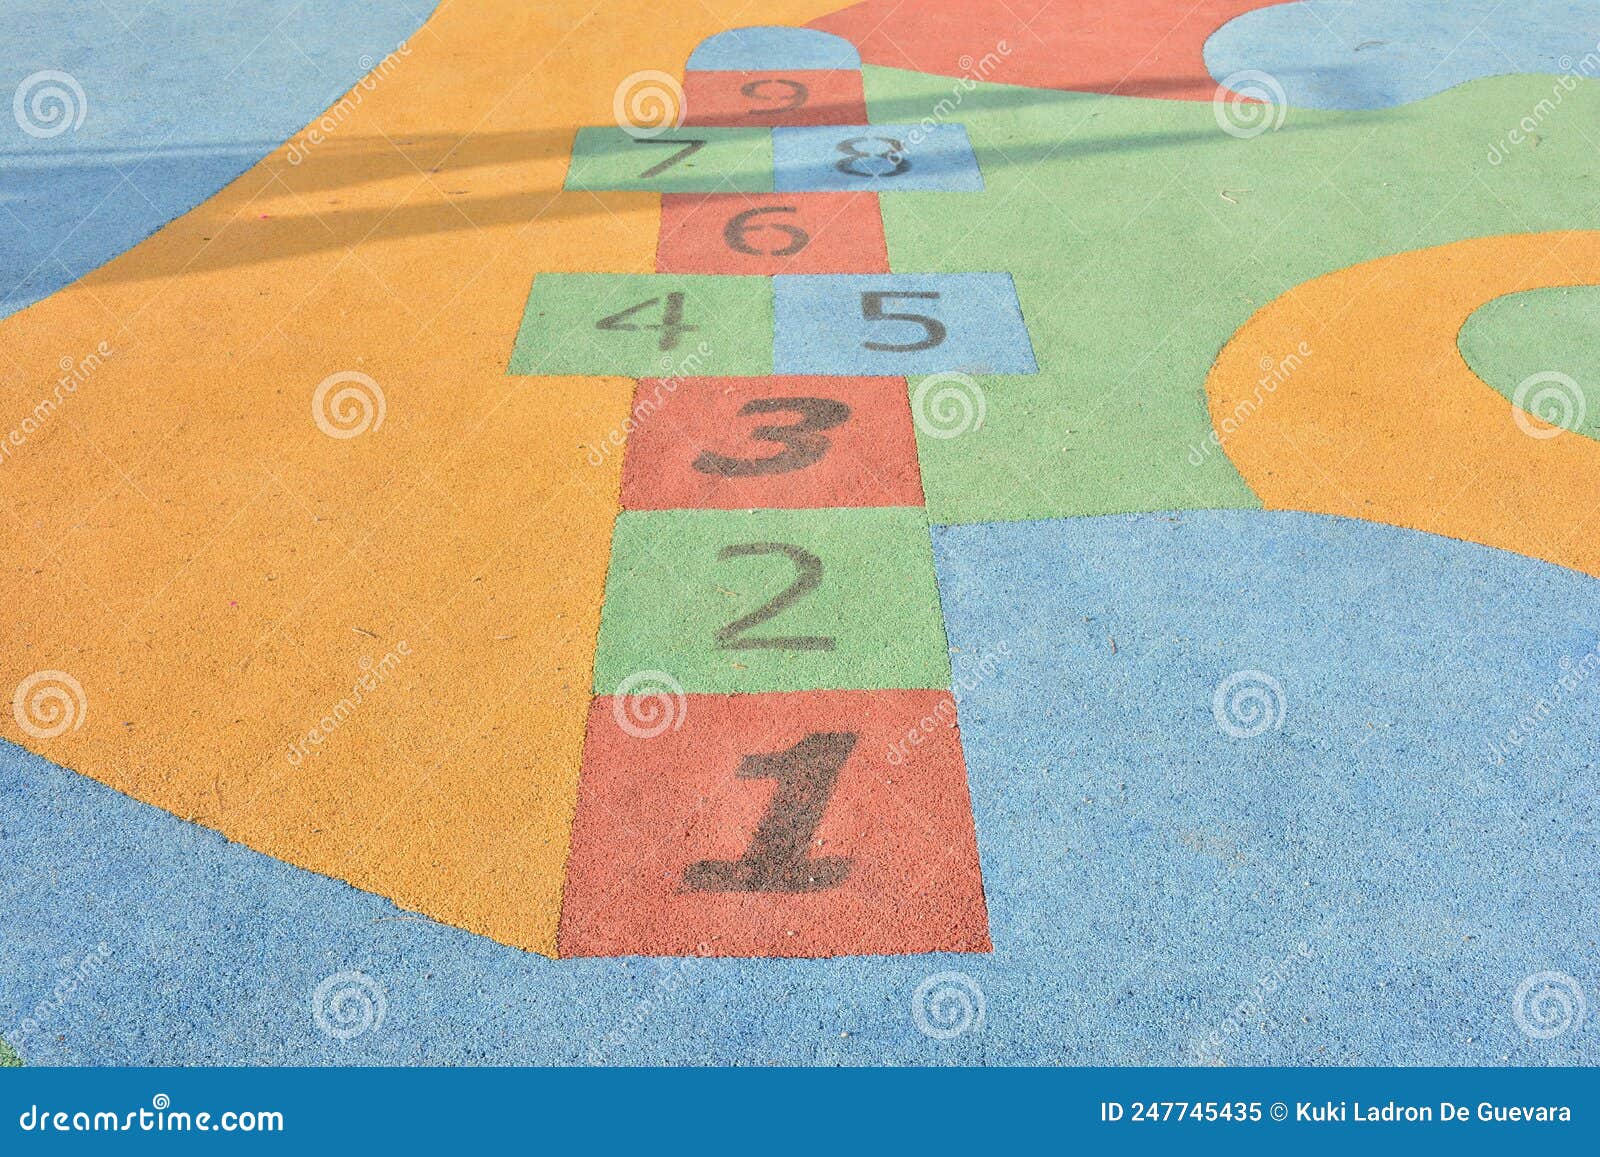 colorful hopscotch made on the floor of a playground